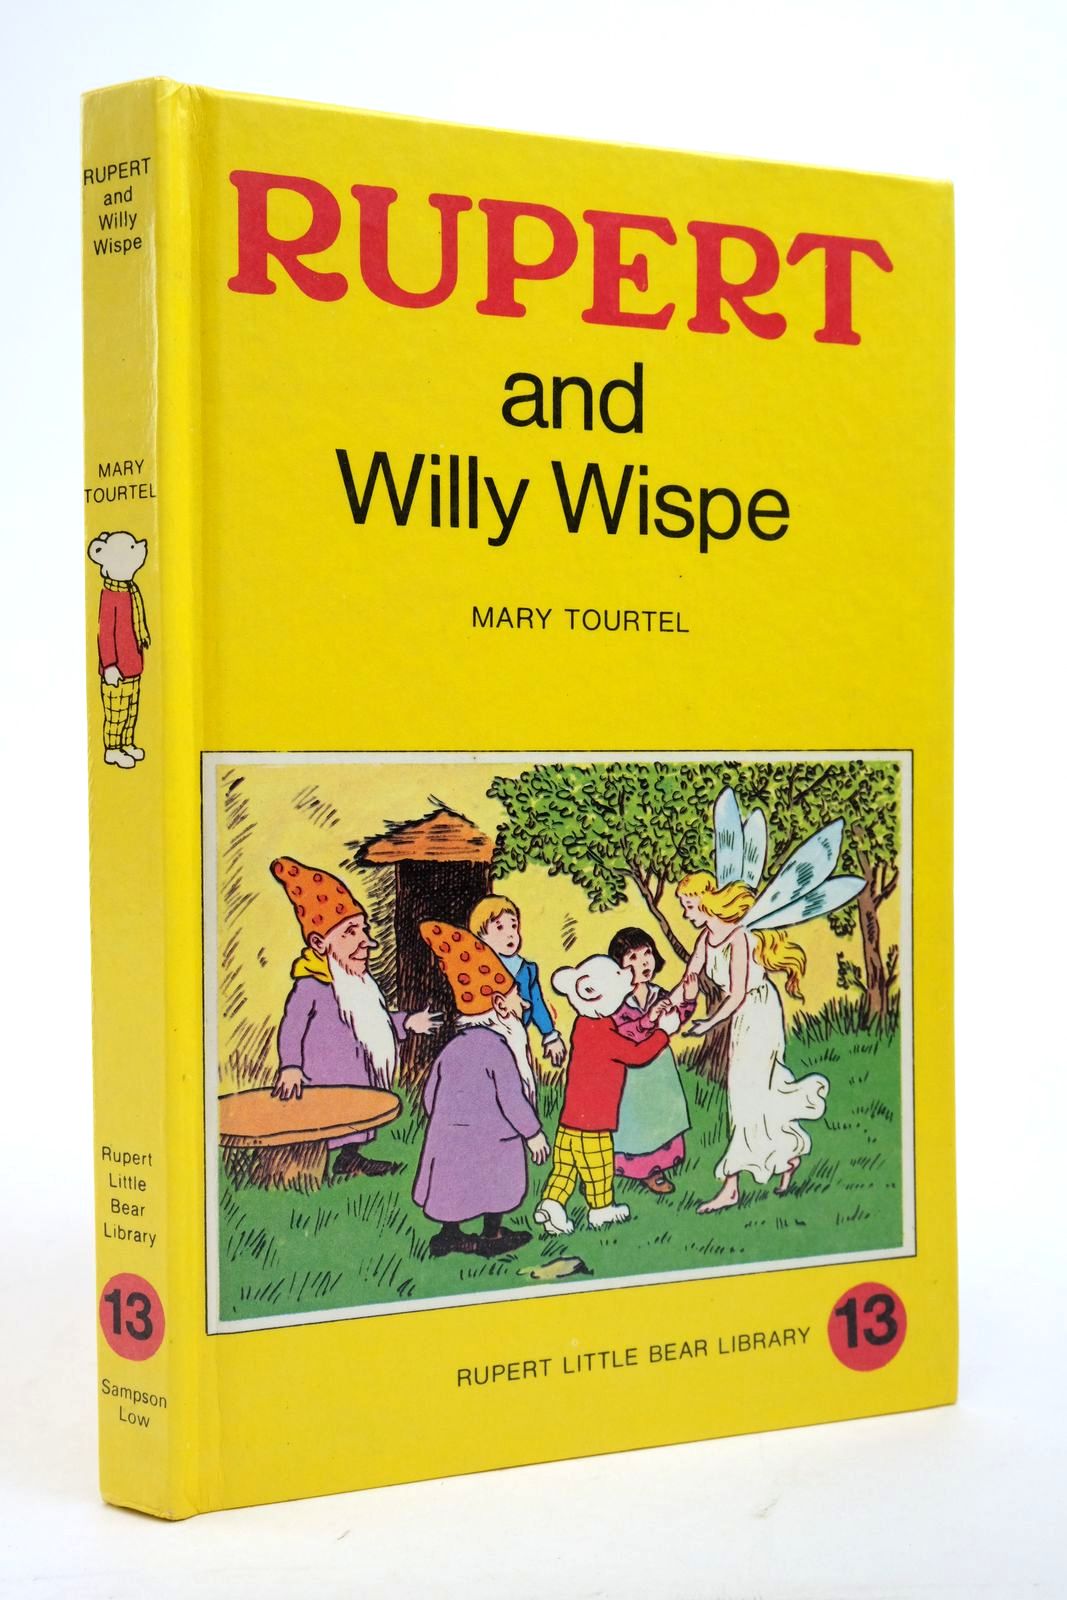 Photo of RUPERT AND WILLY WISPE - RUPERT LITTLE BEAR LIBRARY No. 13 (WOOLWORTH) written by Tourtel, Mary illustrated by Tourtel, Mary published by Sampson Low, Marston &amp; Co. Ltd. (STOCK CODE: 2136965)  for sale by Stella & Rose's Books